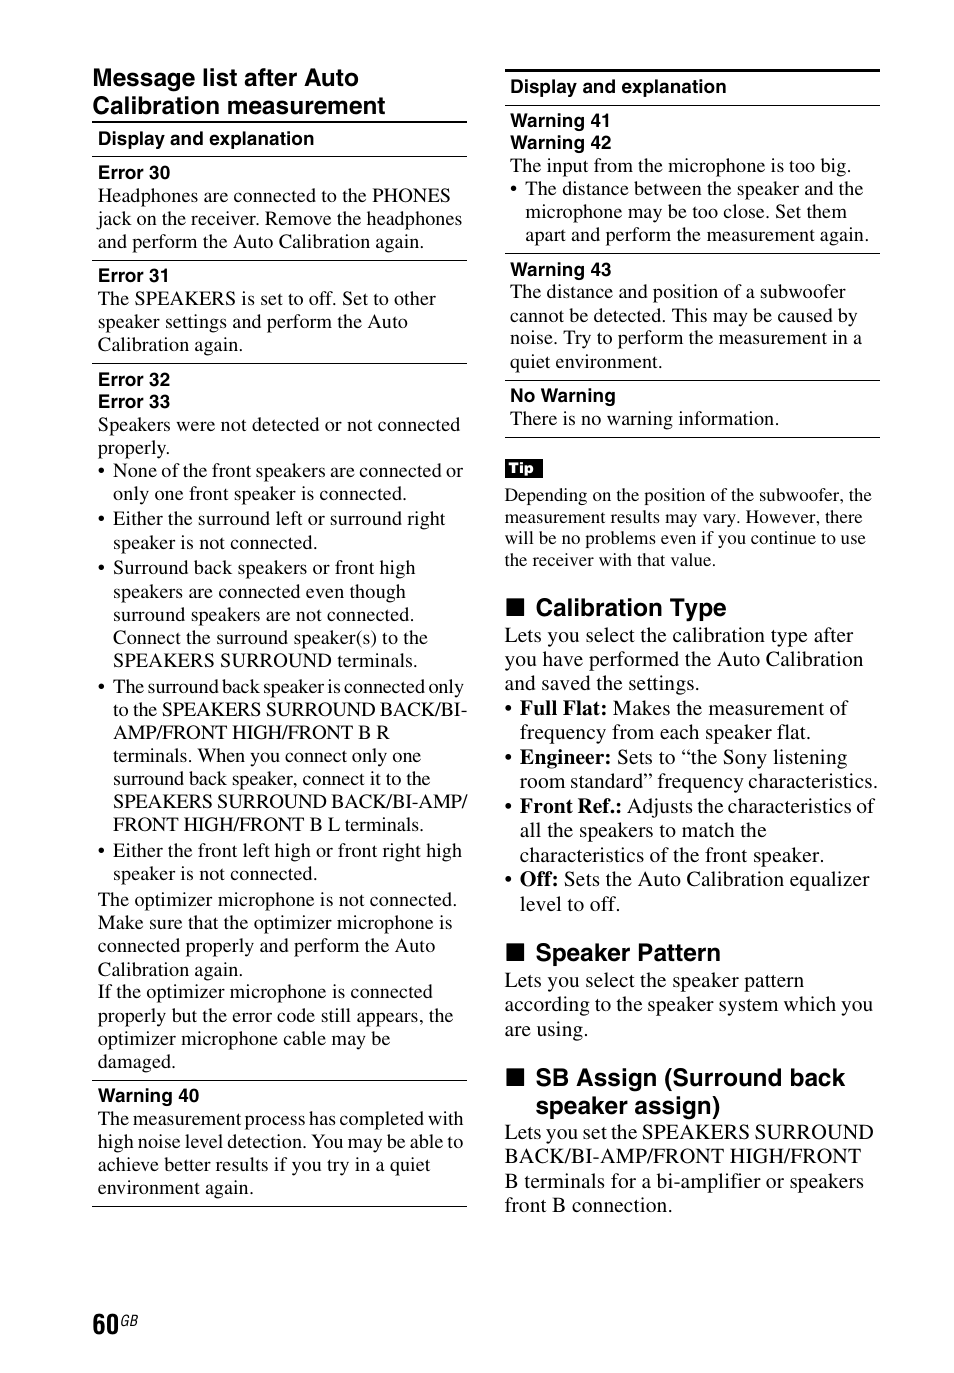 play Unpacking Sincerely Message list after auto calibration measurement, X calibration type, X  speaker pattern | Sony STR-DH740 User Manual | Page 60 / 88 | Original mode